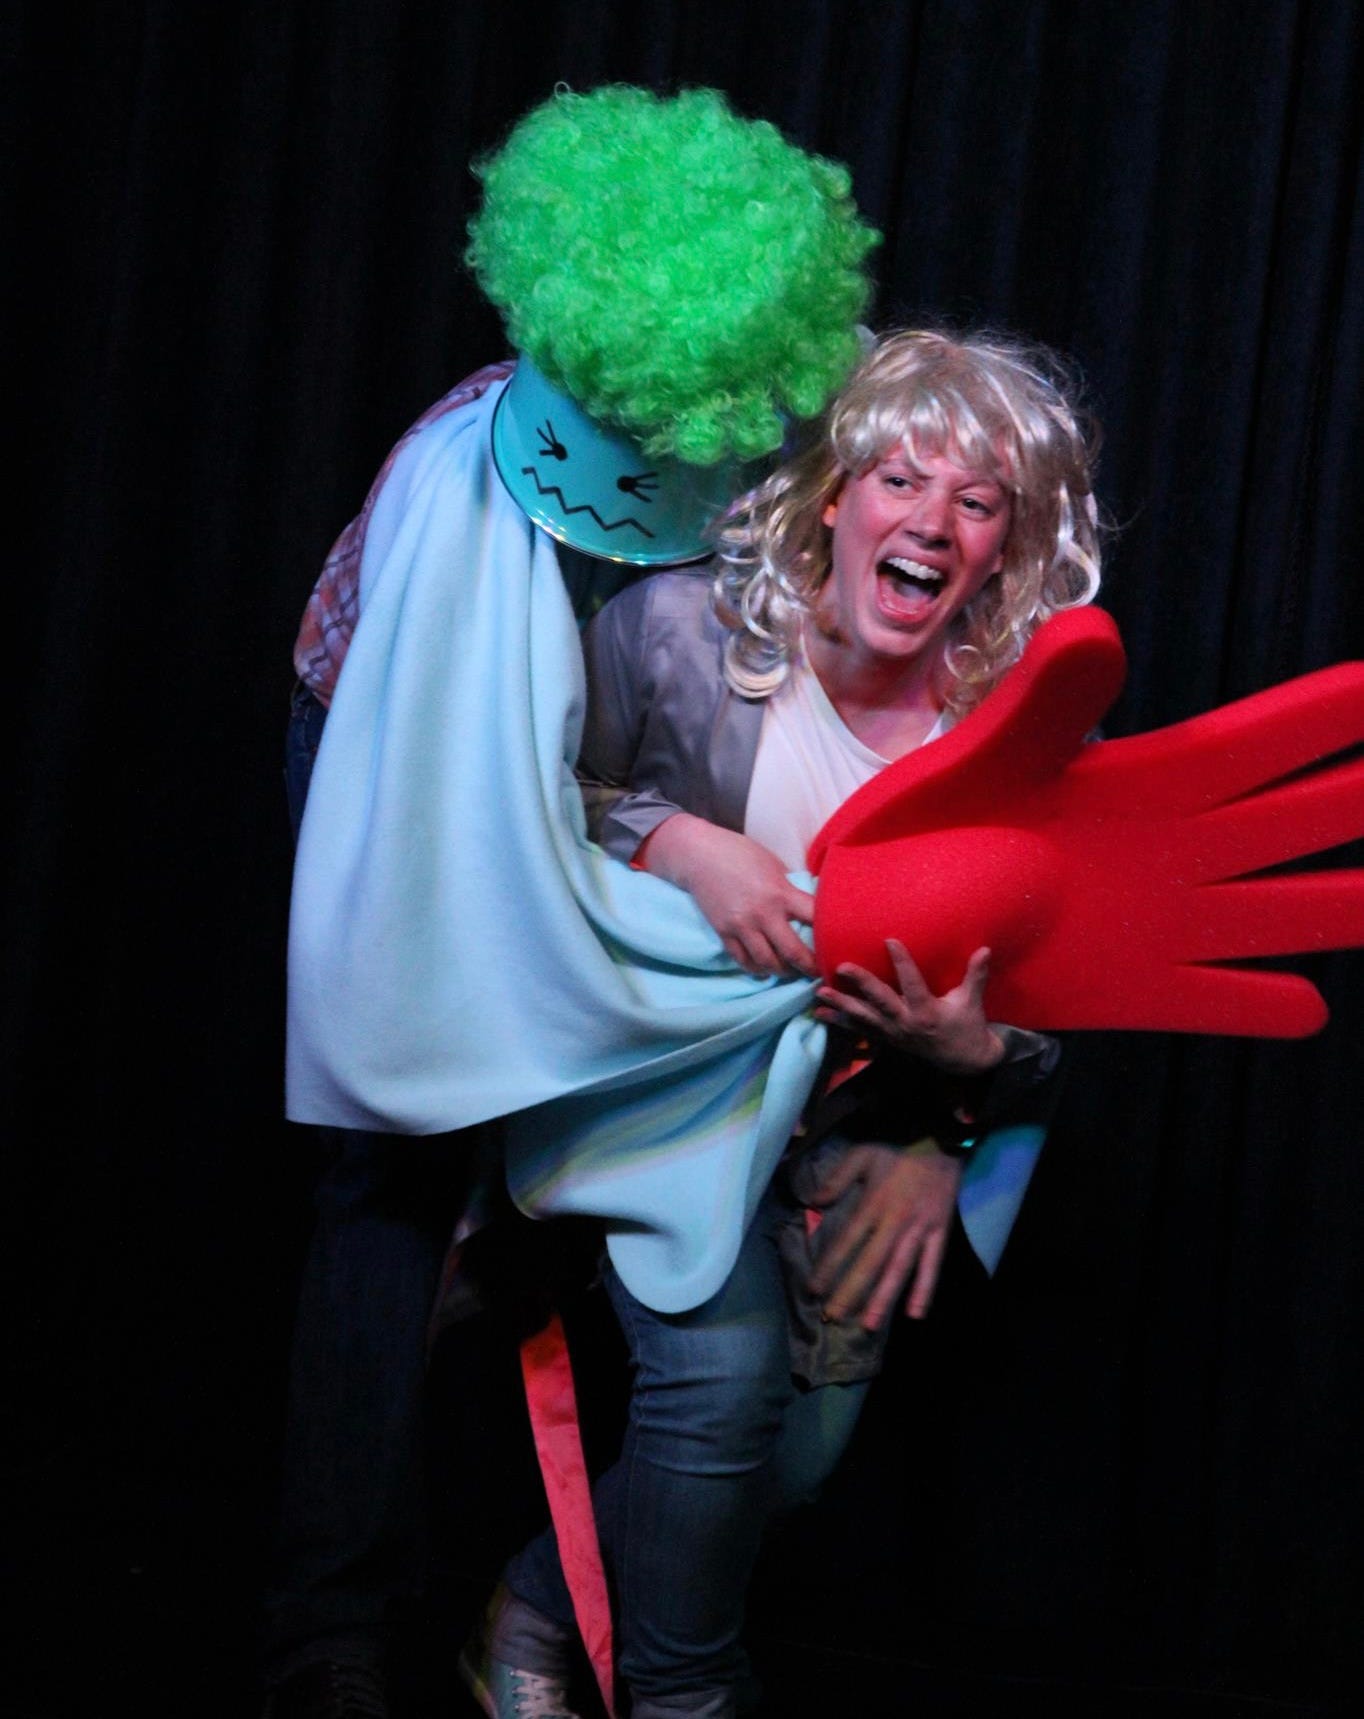 Two performers on stage. One is wearing a blue bin on his head with a face painted on it and a bright green wig. He is clutching the other female performer who wears a blonde wig and is screaming. He envelops her in a blanket and a giant red glove to look like it's his hand